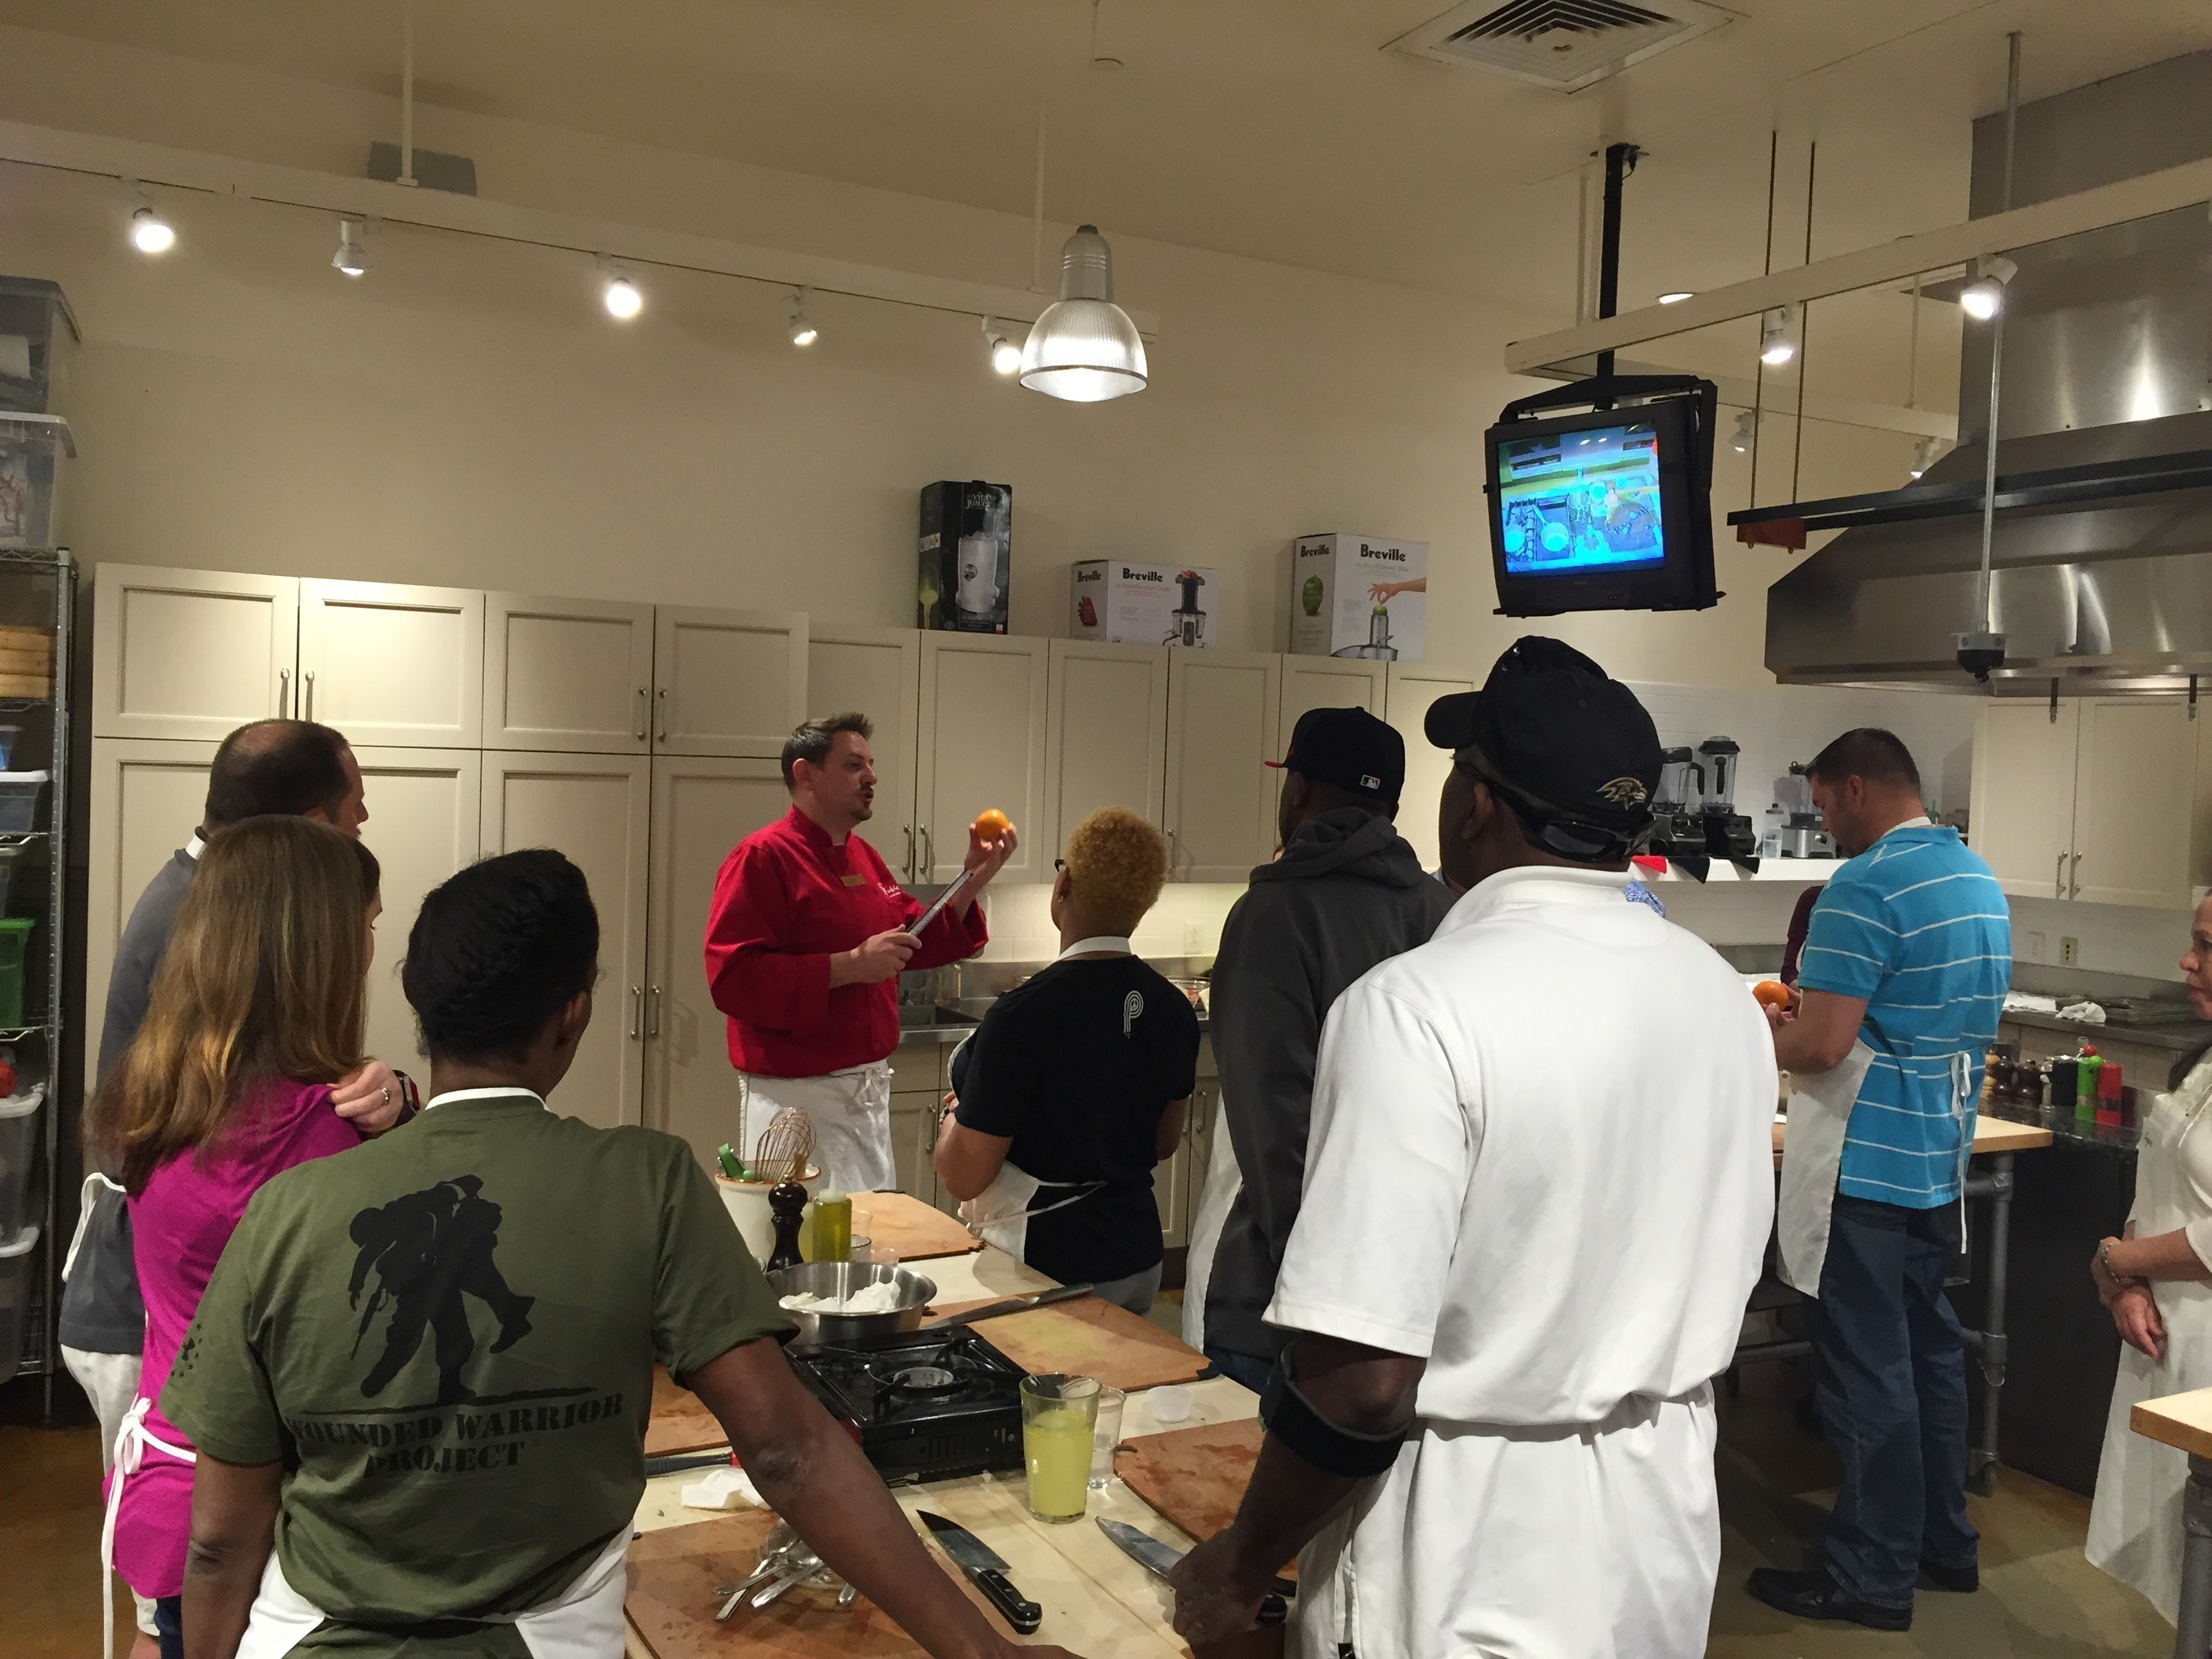 Wounded veterans and their guests learn Greek culinary skills.